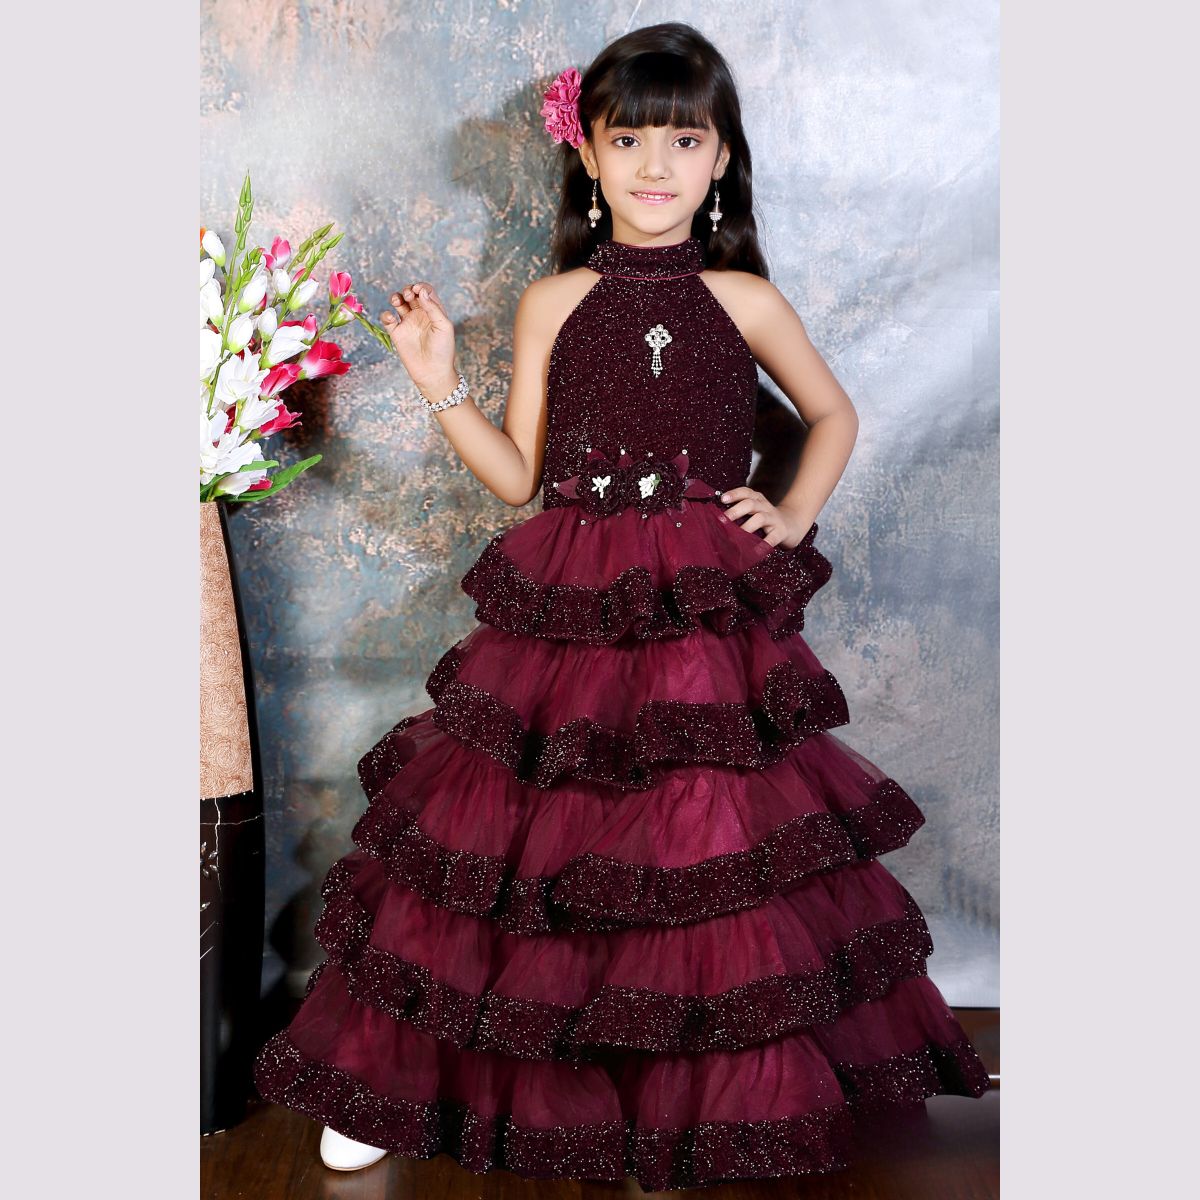 Stunning Flower Girl Dresses For Weddings, Pageants, And Birthdays High And  Low Styles With O Neck And Long Tail From Originality11, $105.87 |  DHgate.Com